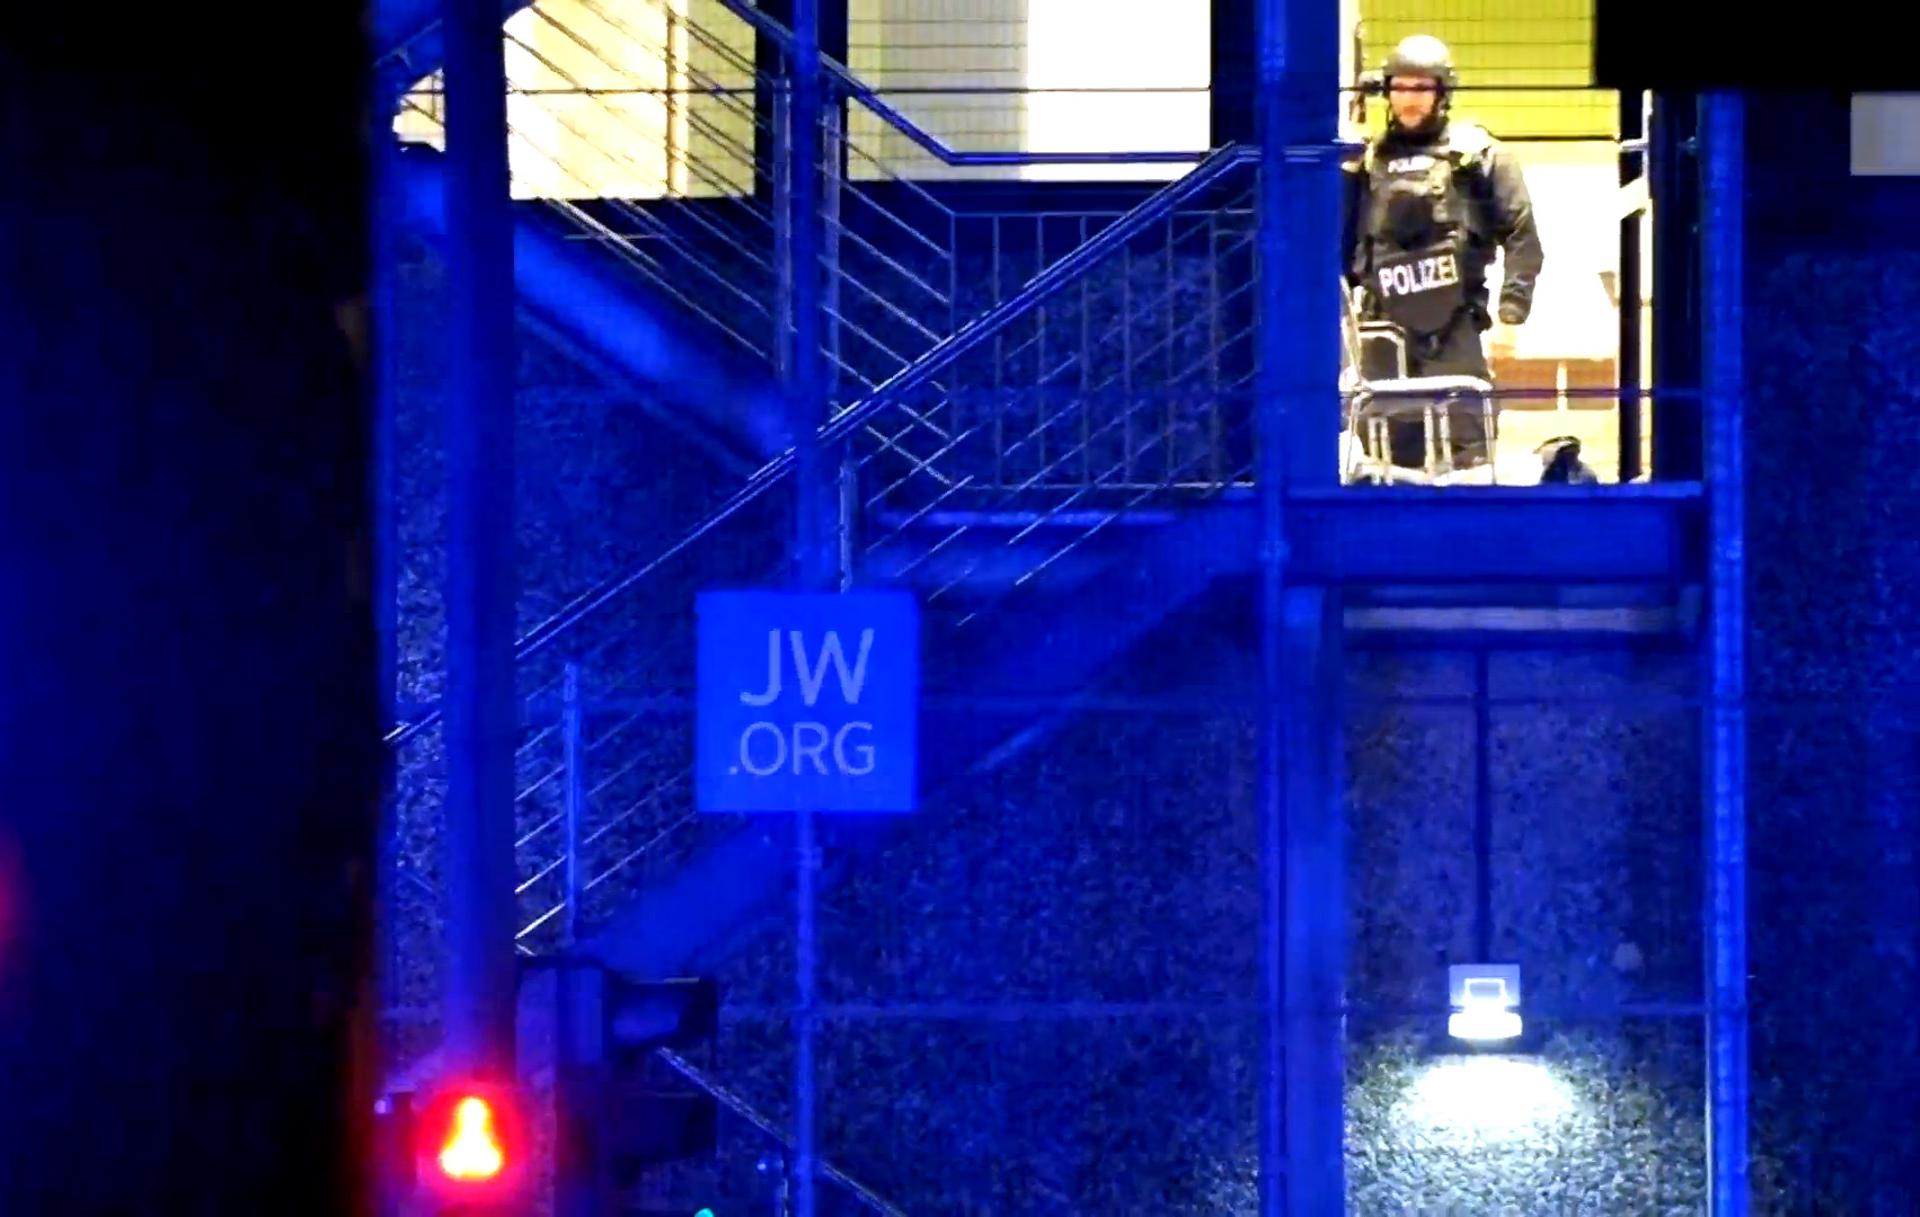 German police inspected the interior of the church of Jehovah's Witnesses in Hamburg where a shooting took place last night.